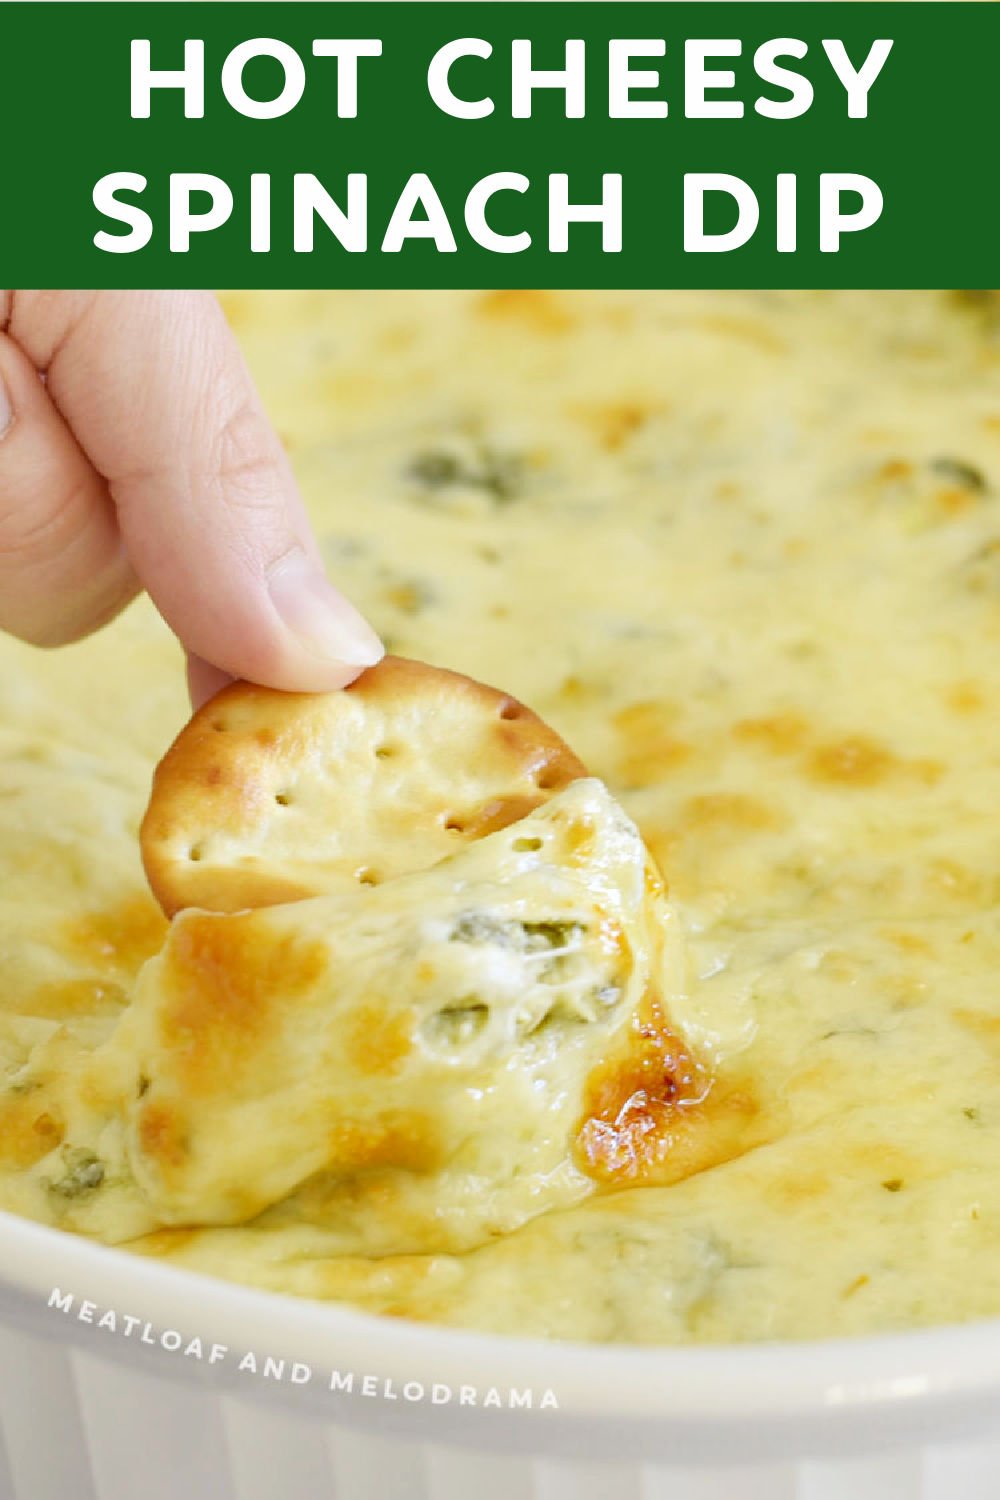 Hot Cheesy Spinach Dip made with fresh spinach, artichoke hearts, Parmesan cheese and pepper jack cheese is a delicious easy appetizer recipe everyone loves. This warm spinach dip is perfect for the holidays or game day and is the BEST spinach artichoke dip ever! via @meamel